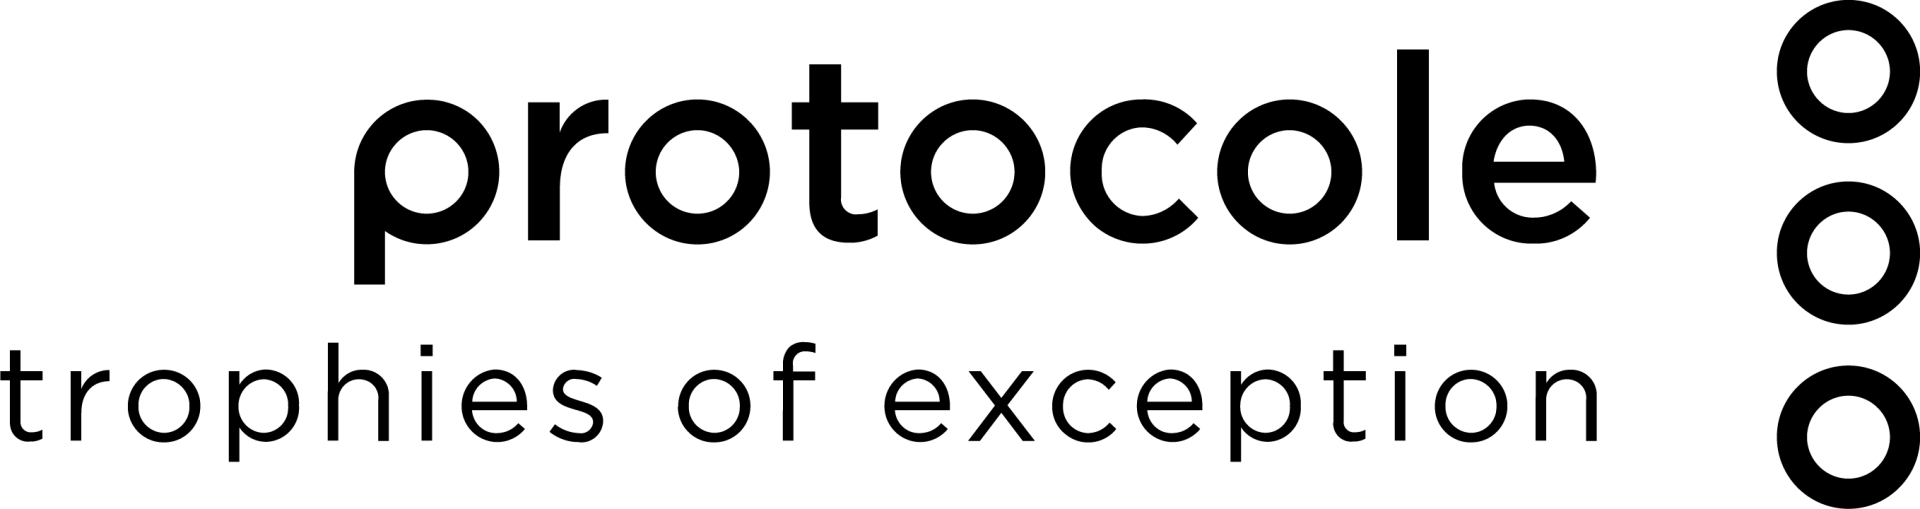 Protocole Trophies of Exception LOGO